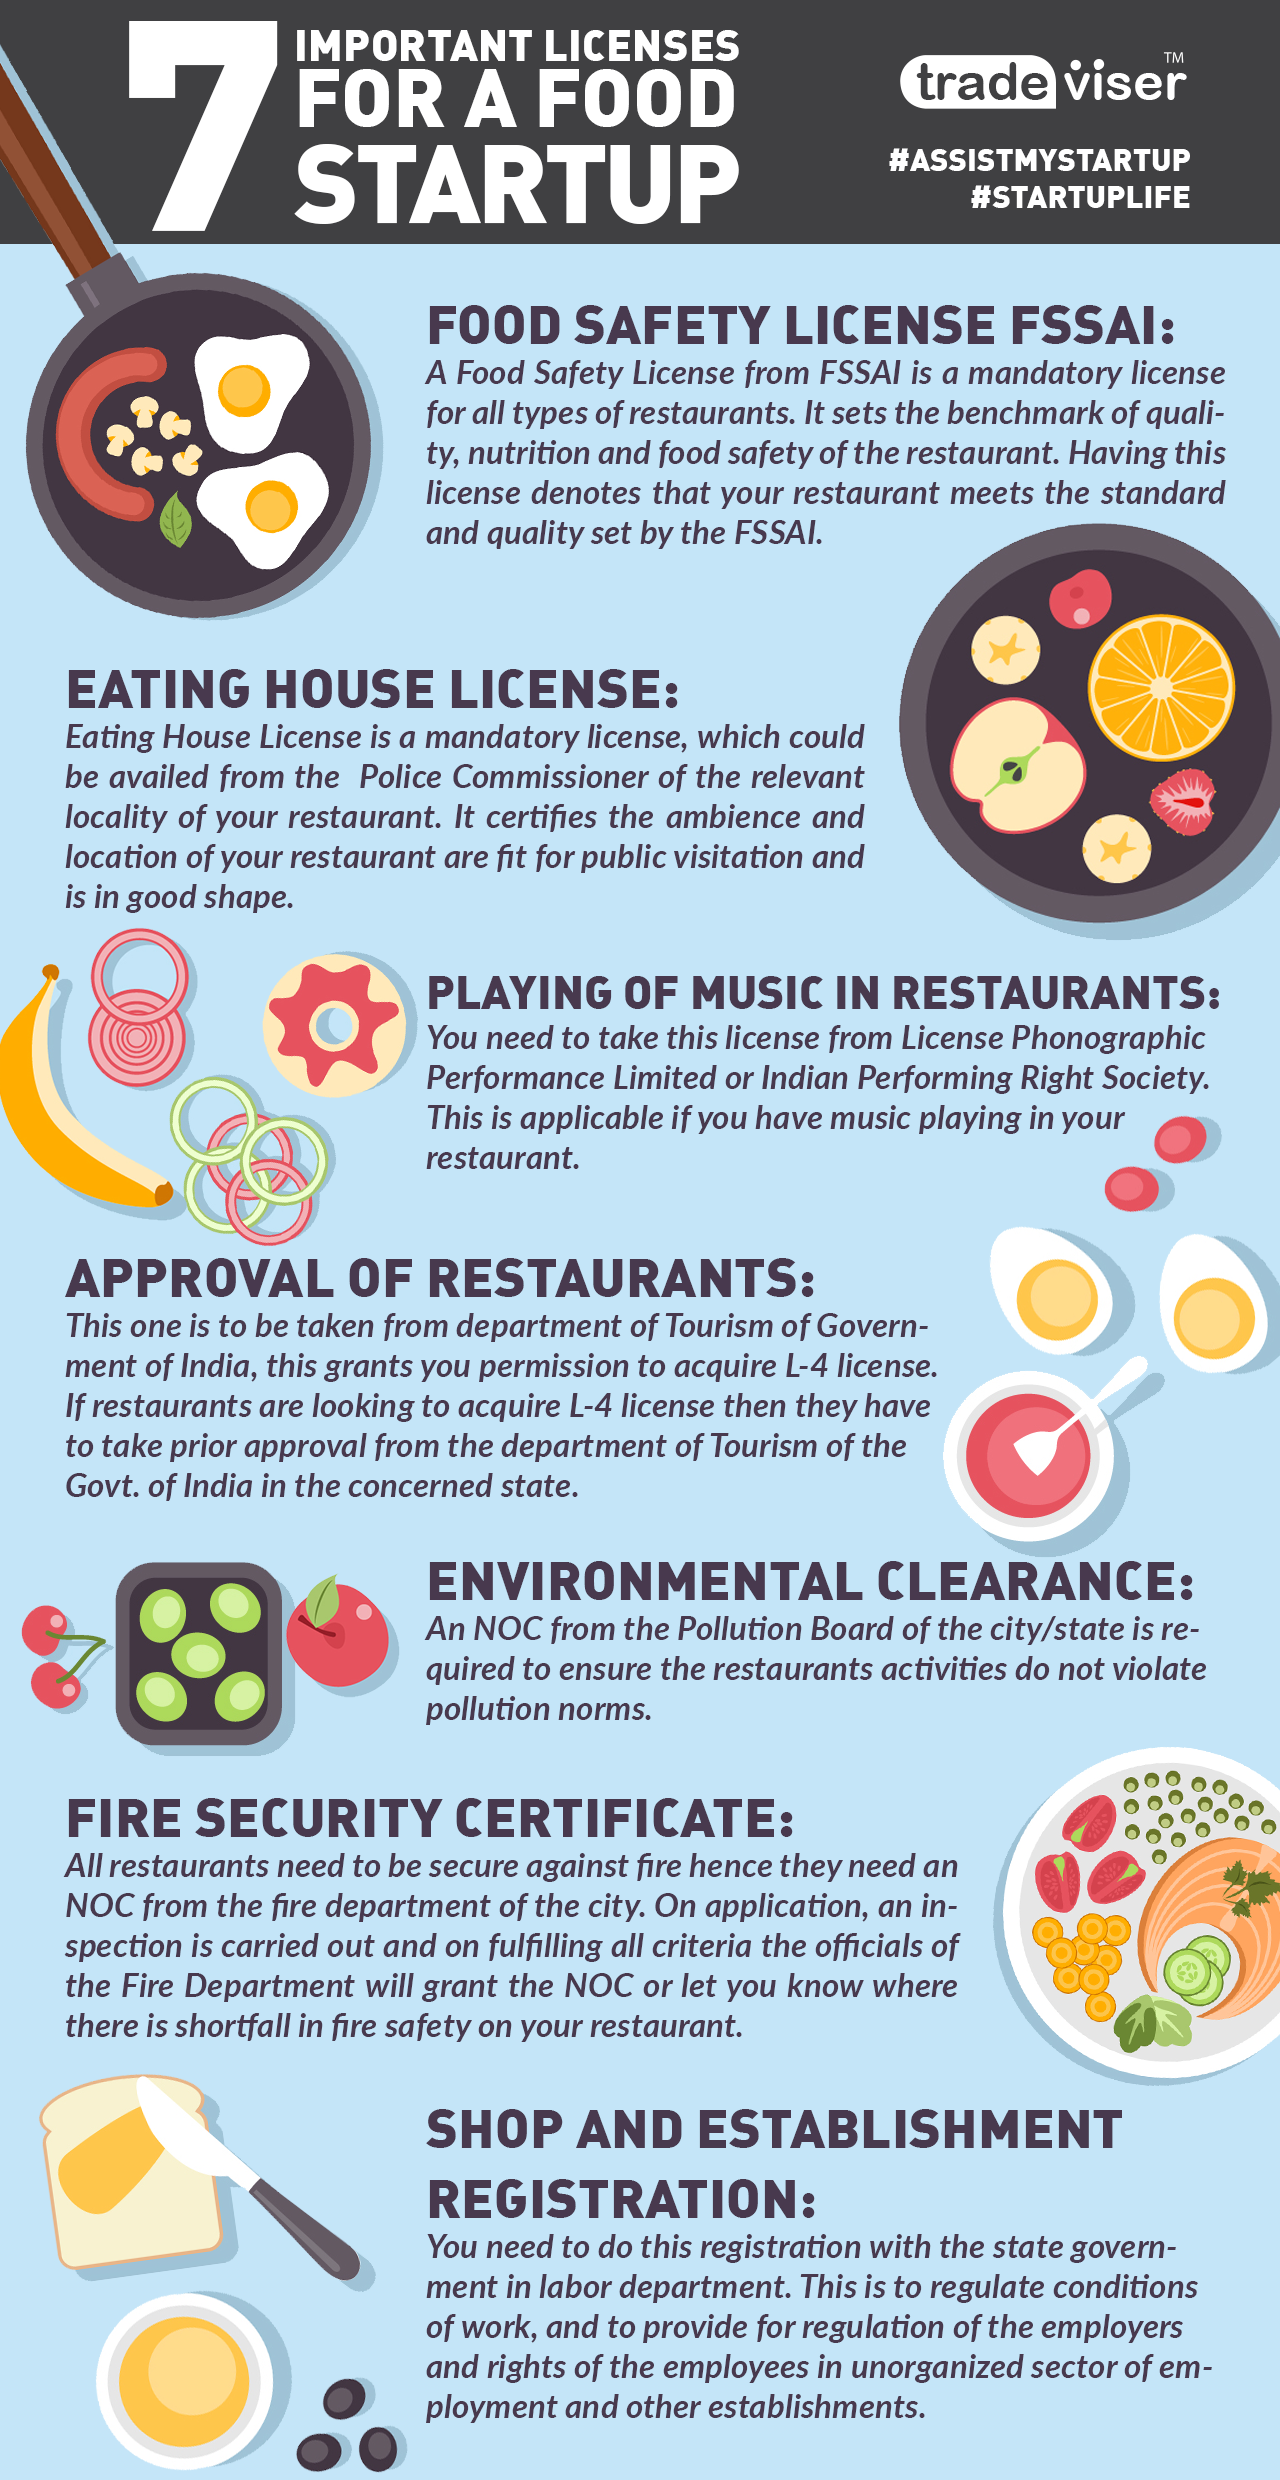 License and Registration, Quick Guide to all the Licenses and Registrations required for a Restaurant Business